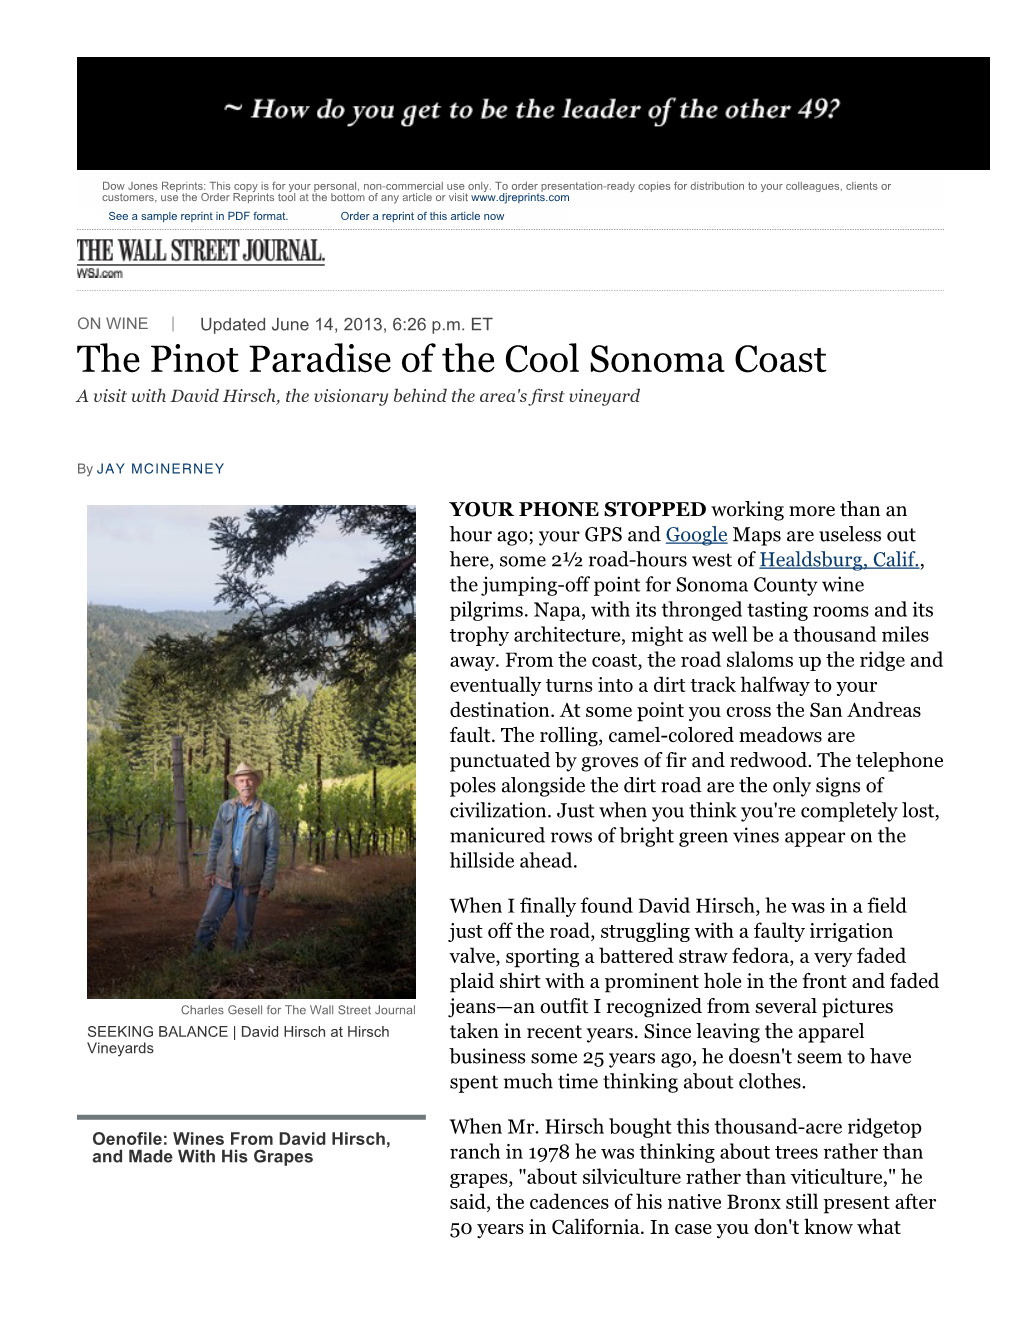 The Pinot Paradise of the Cool Sonoma Coast a Visit with David Hirsch, the Visionary Behind the Area's First Vineyard